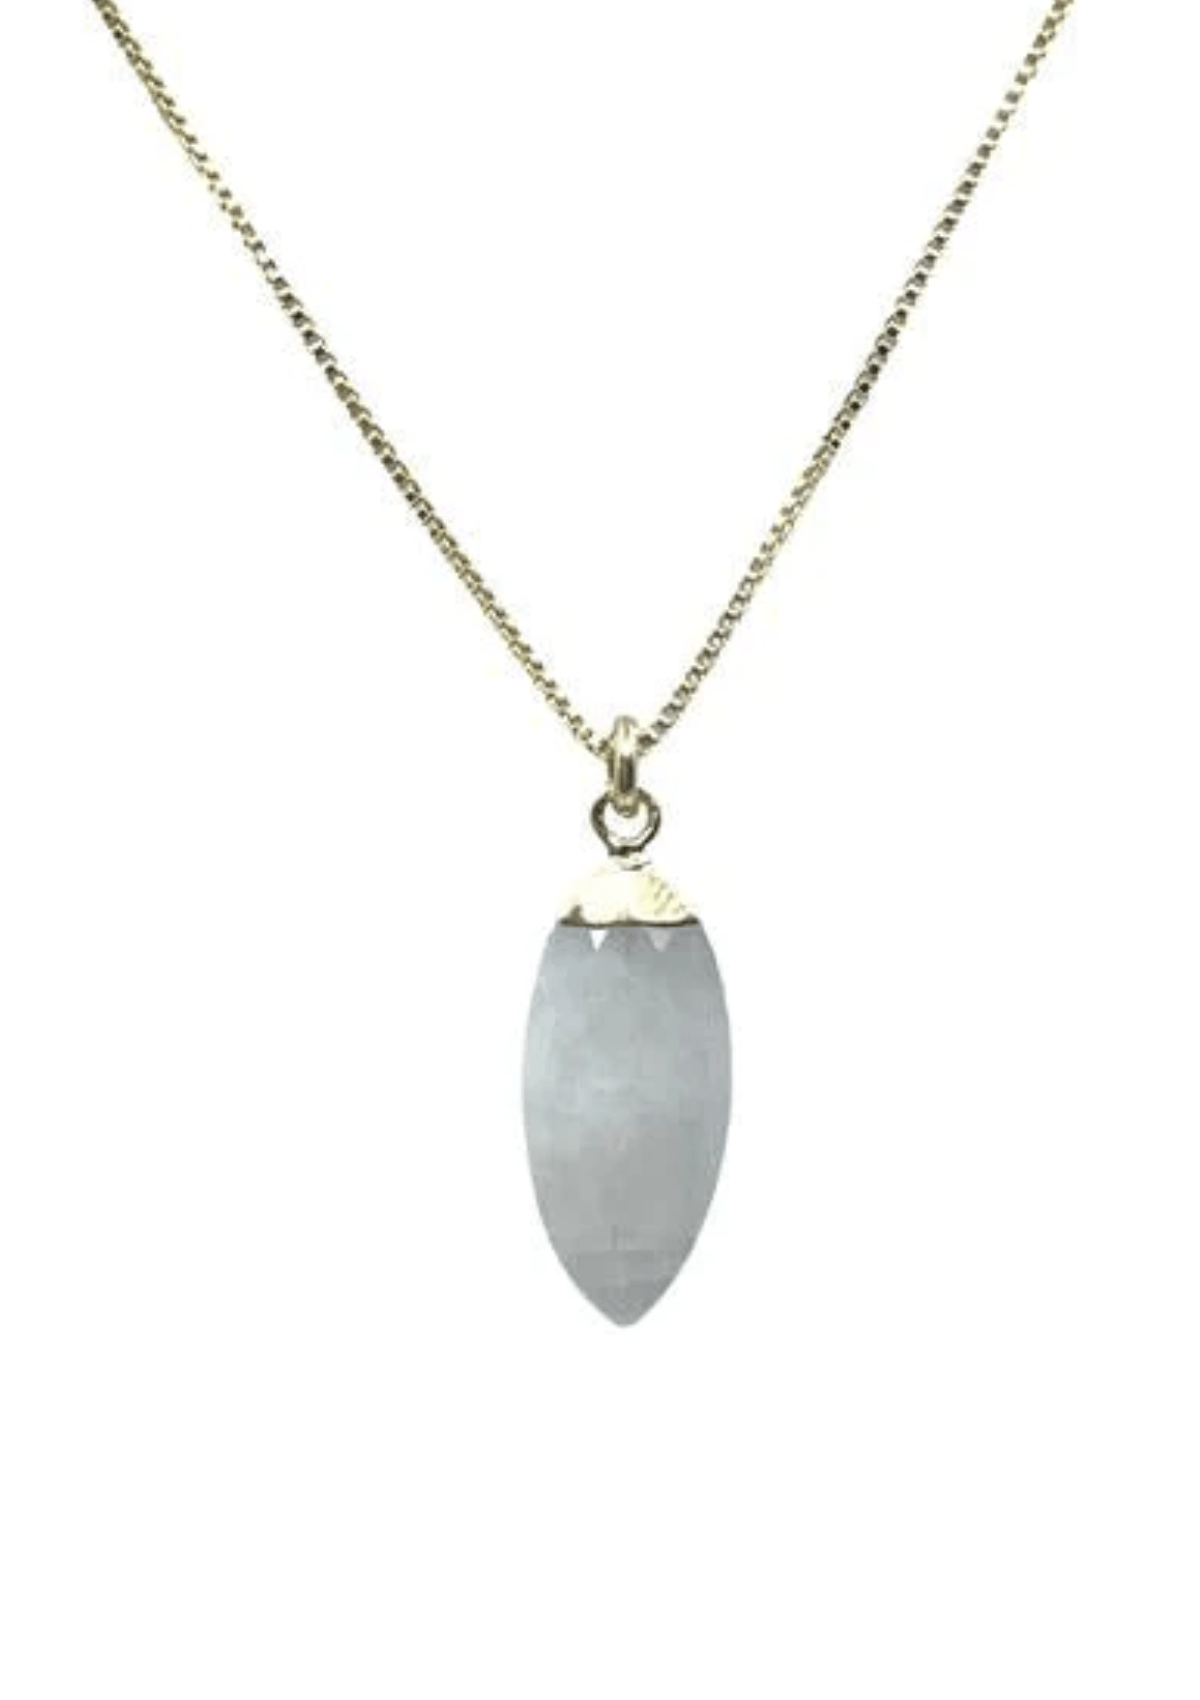 Marquis Cut Moonstone on 18K Gold-Fill Chain Necklace -Athena Designs- Ruby Jane-